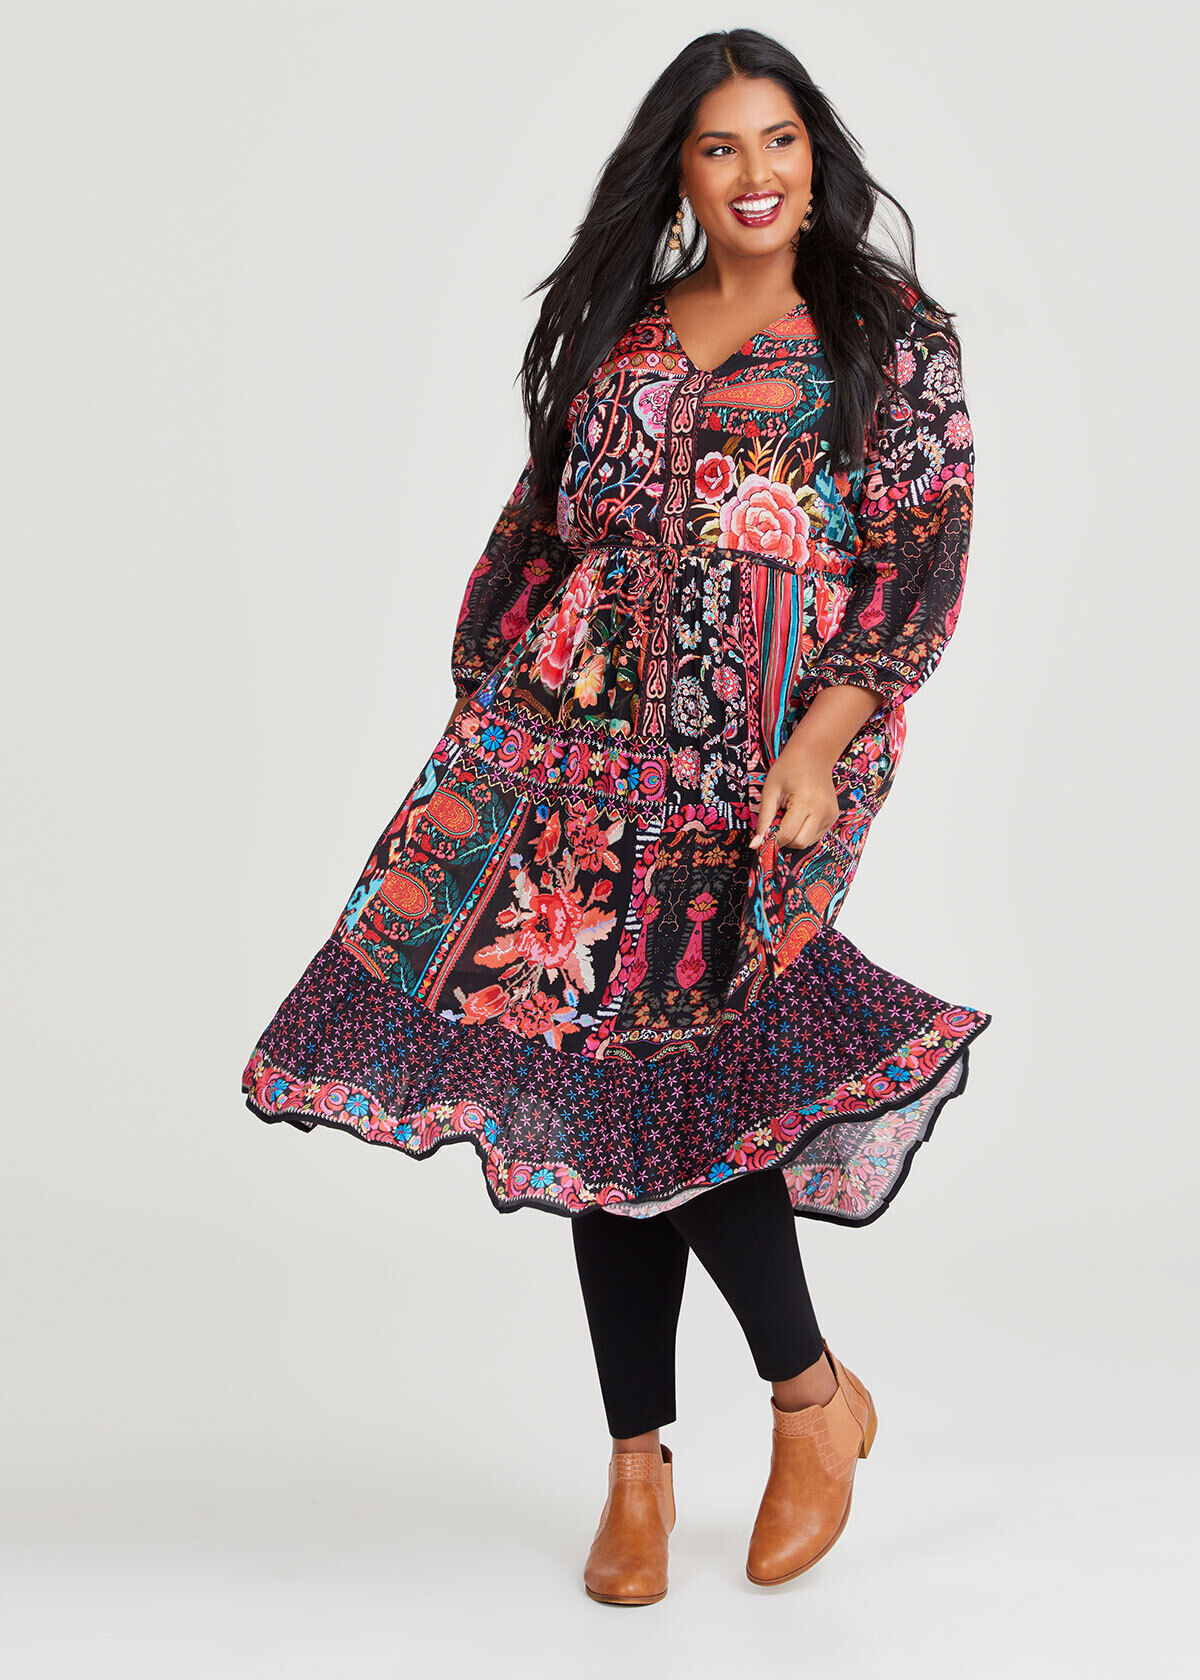 Plus Size Casual Dresses: Relaxed, Everyday & Comfortable | Taking Shape USA